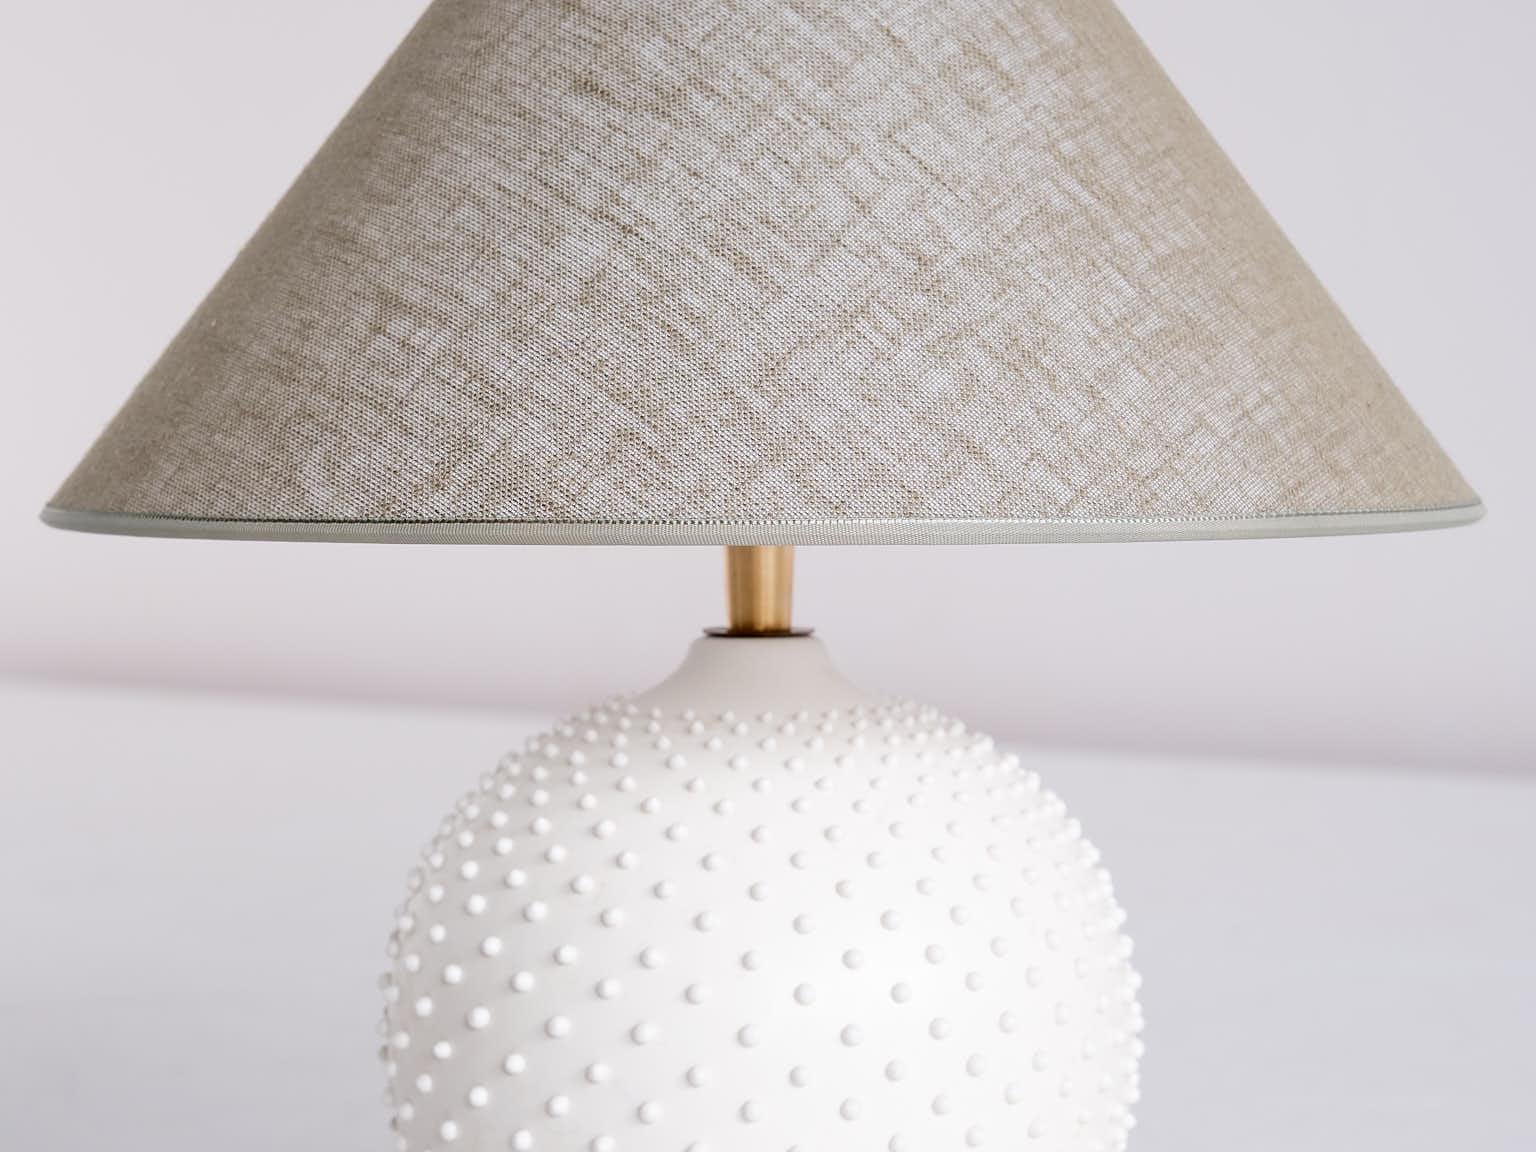 Alvino Bagni Sphere Table Lamp in White Textured Ceramic, Italy, 1970s In Good Condition For Sale In The Hague, NL